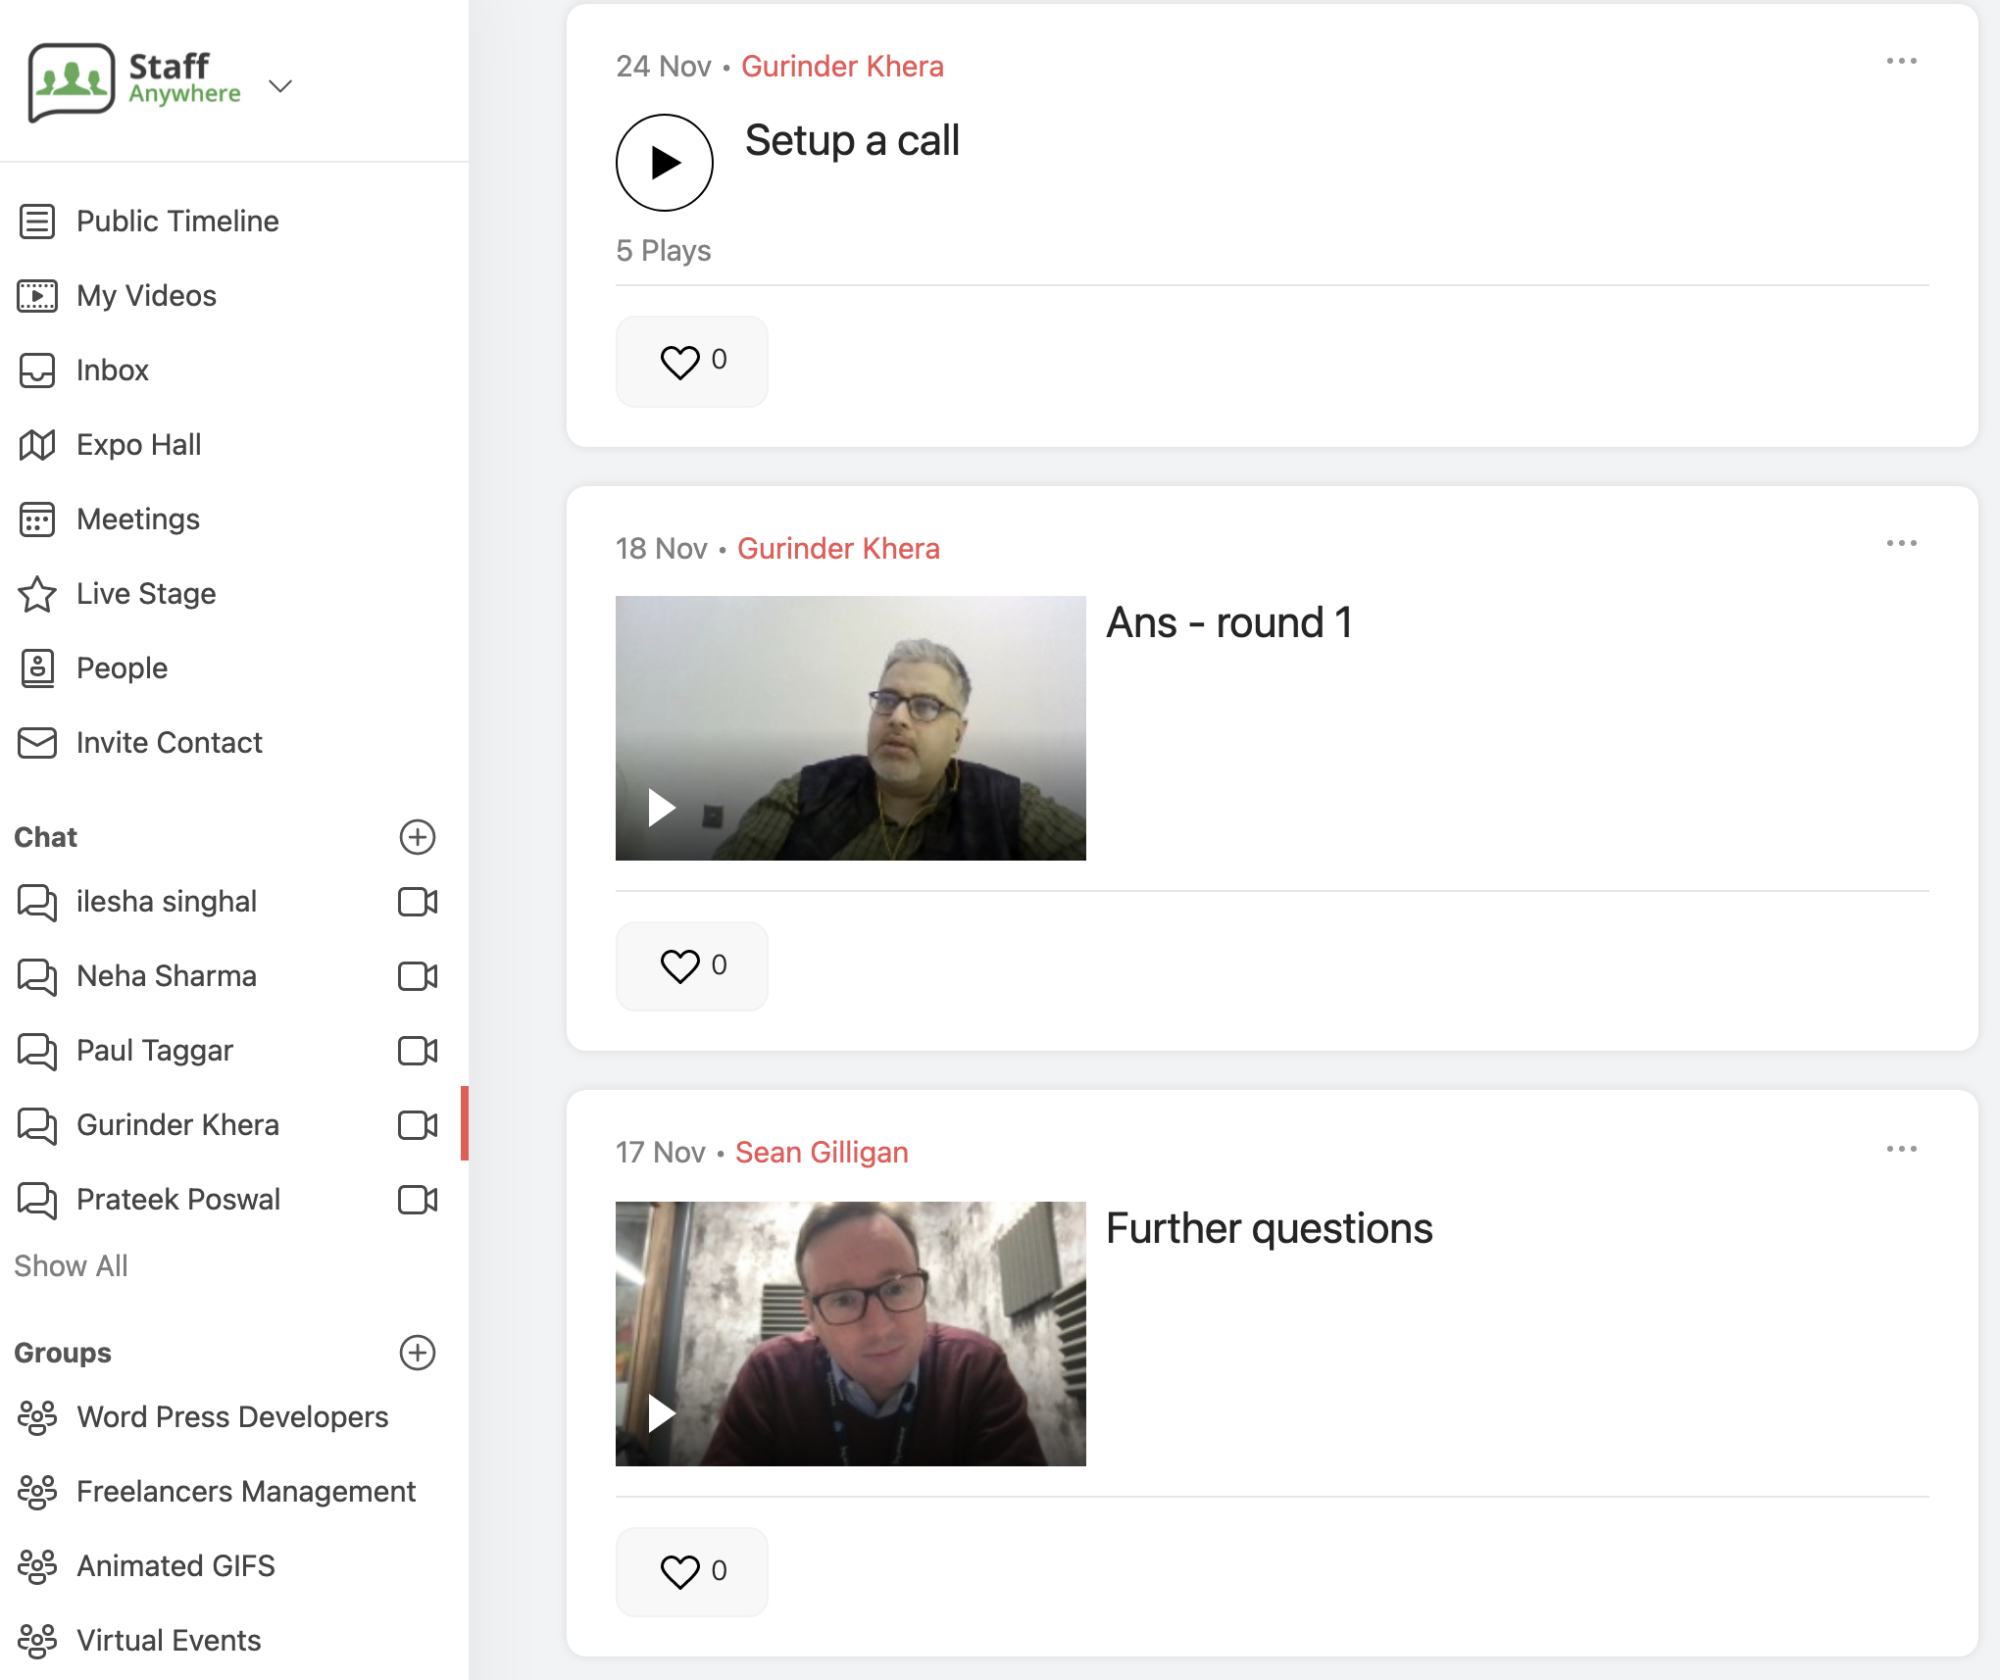 Staff Anywhere portal for freelancers uses Watch and Learn for video messaging candidates